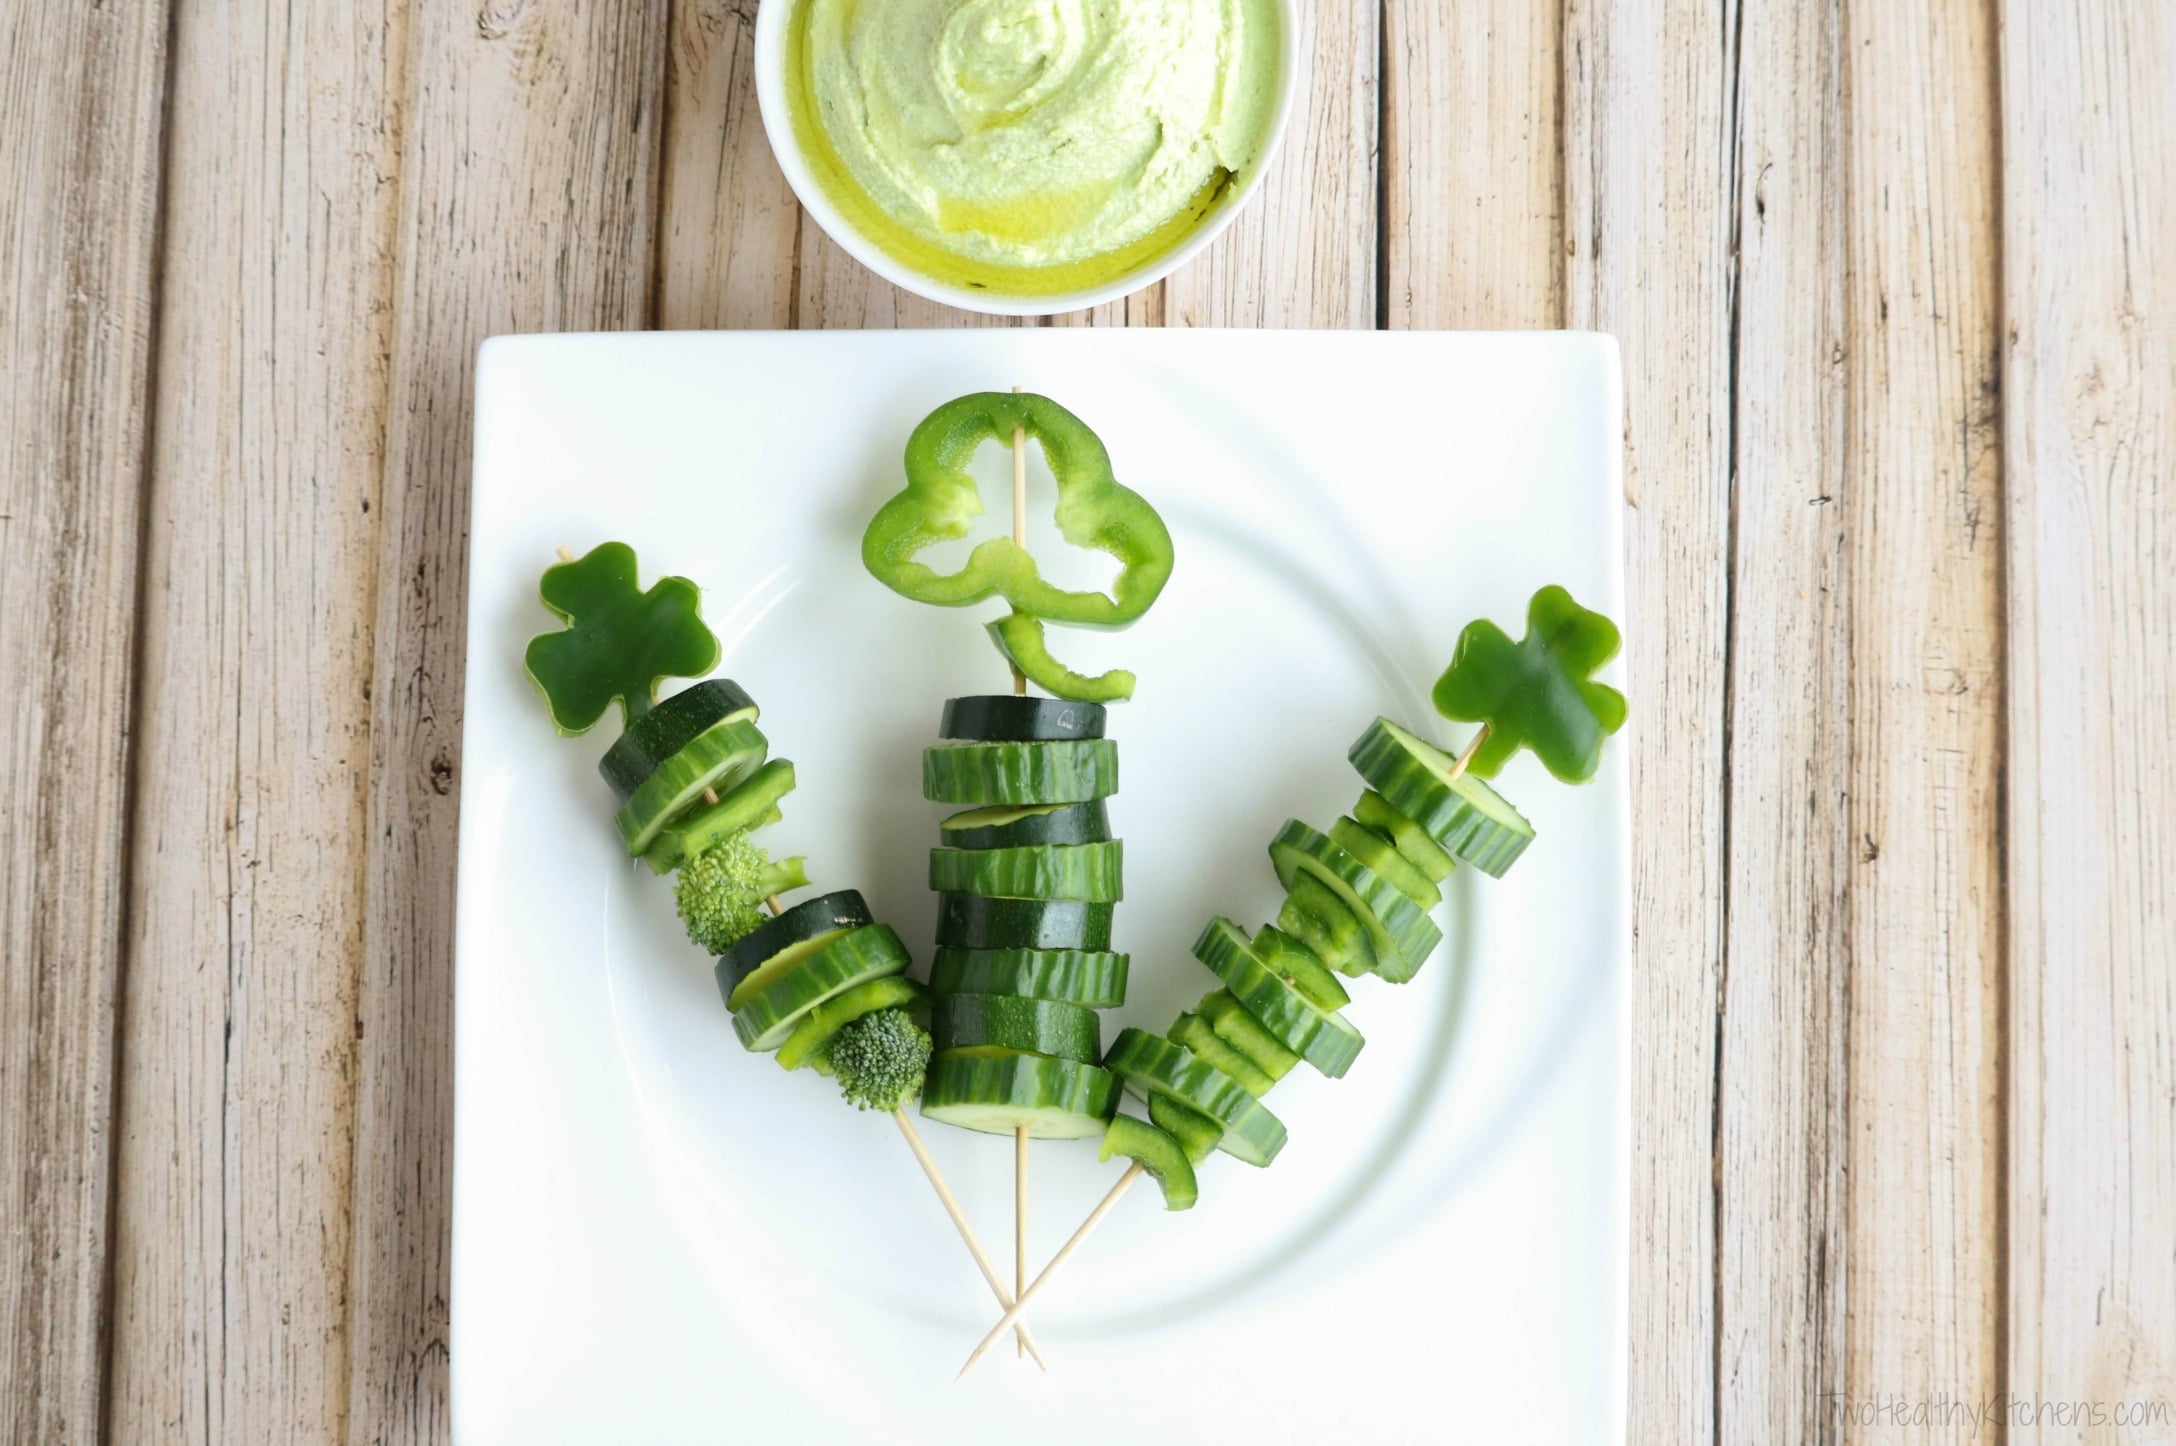 3 skewers on white plate, topped with different shamrocks, with a bowl of green veggie dip at top.